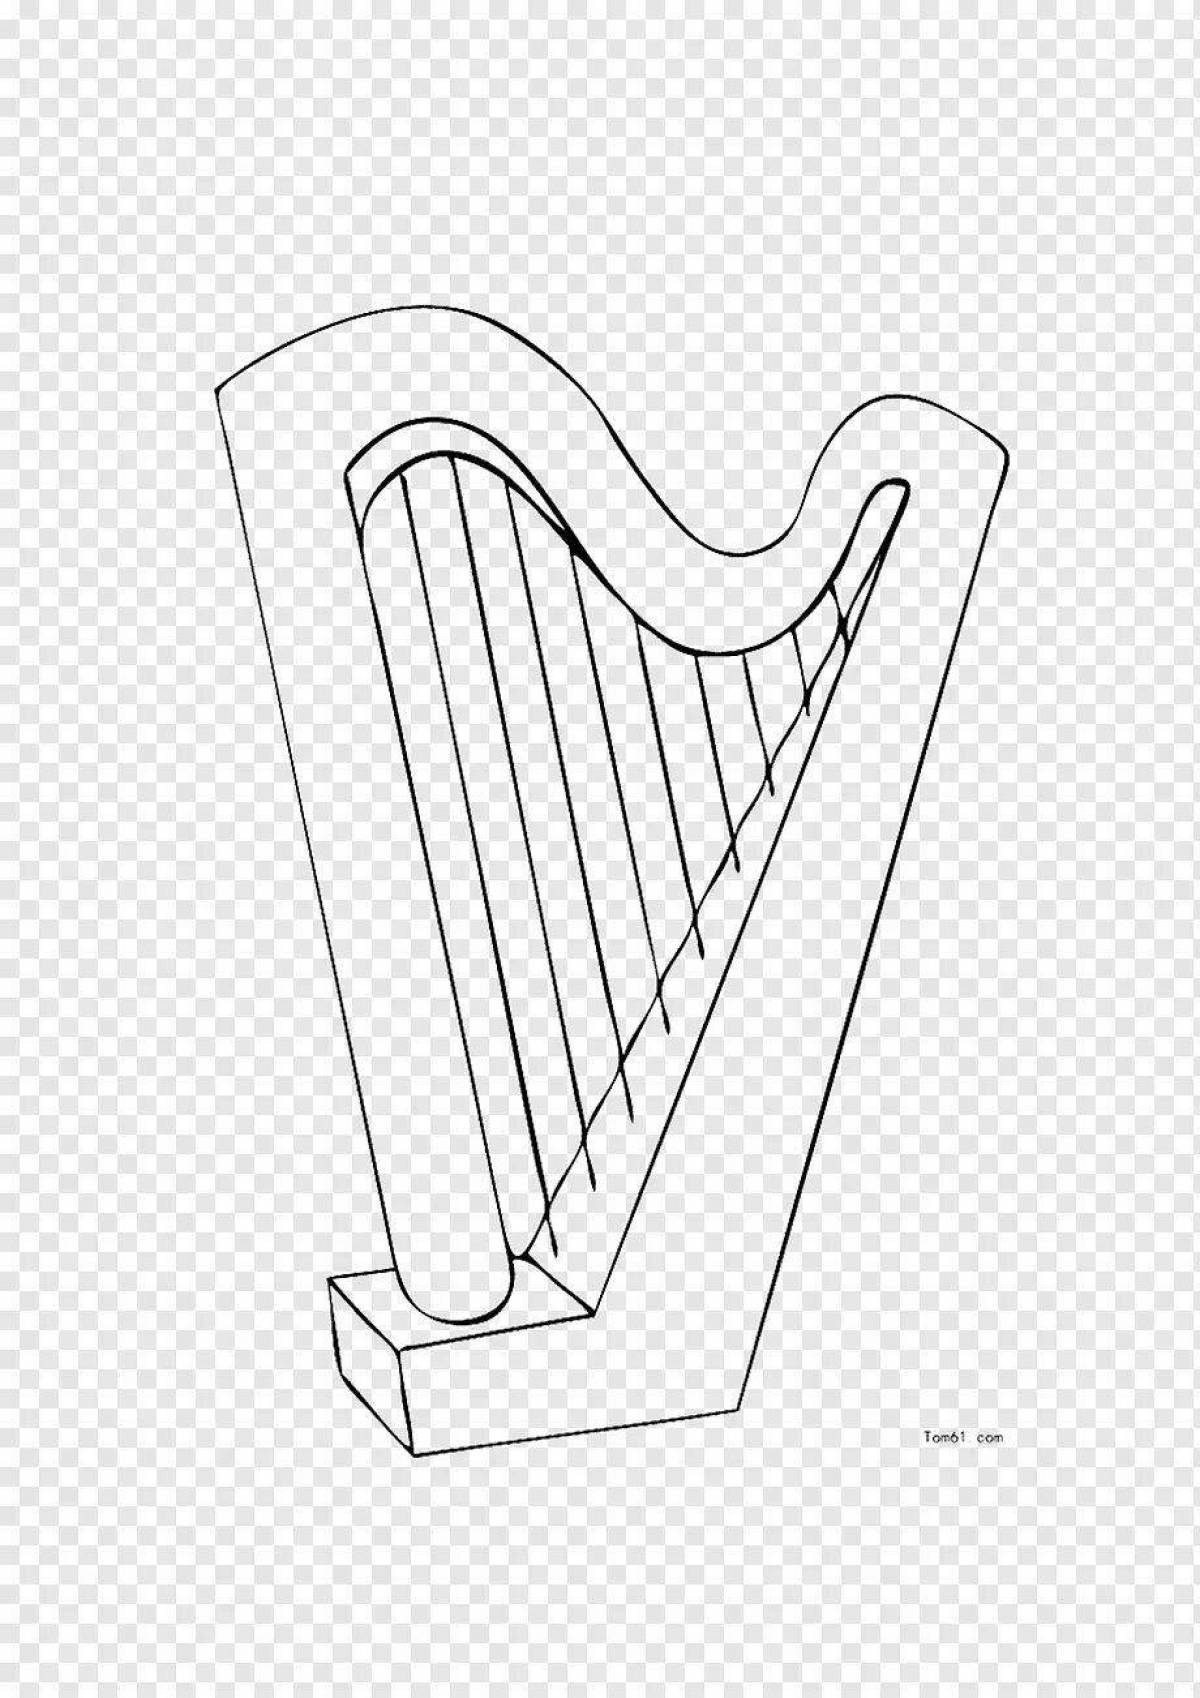 Drawing of the mystical harp